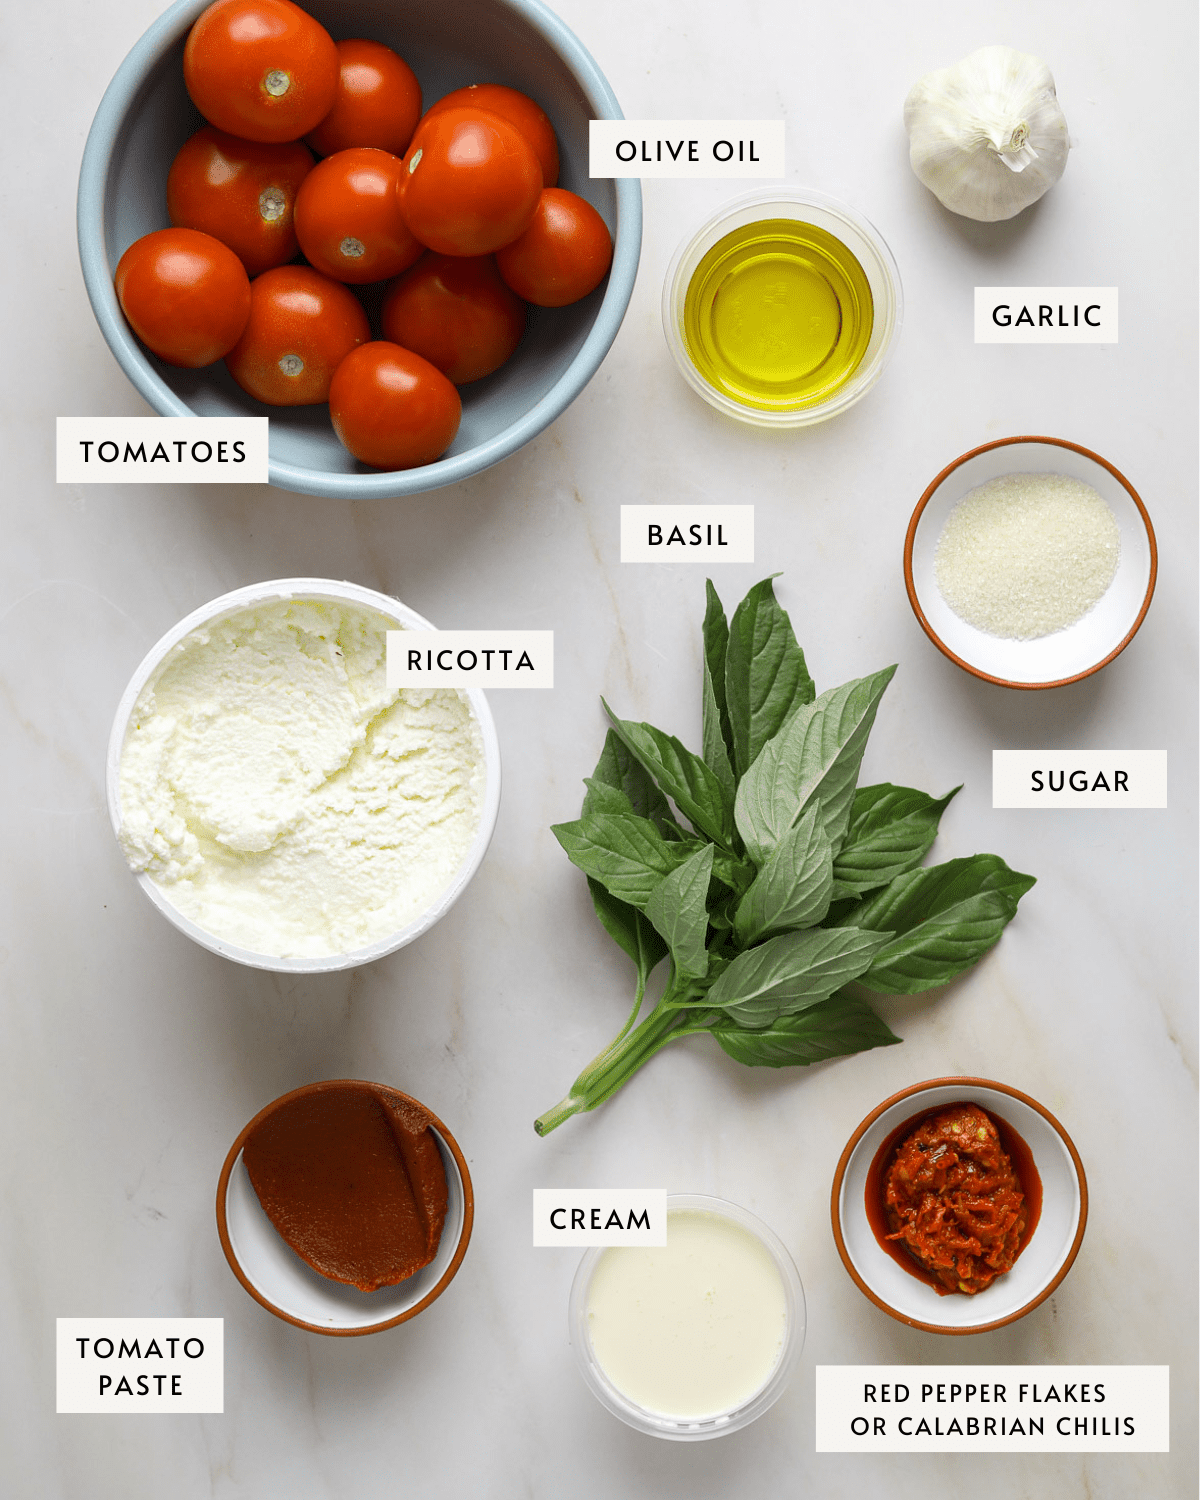 a bowl of cherry tomatoes, a tub of ricotta cheese, a bundle of fresh basil and assorted small bowls of spices and ingredients on a marble background.